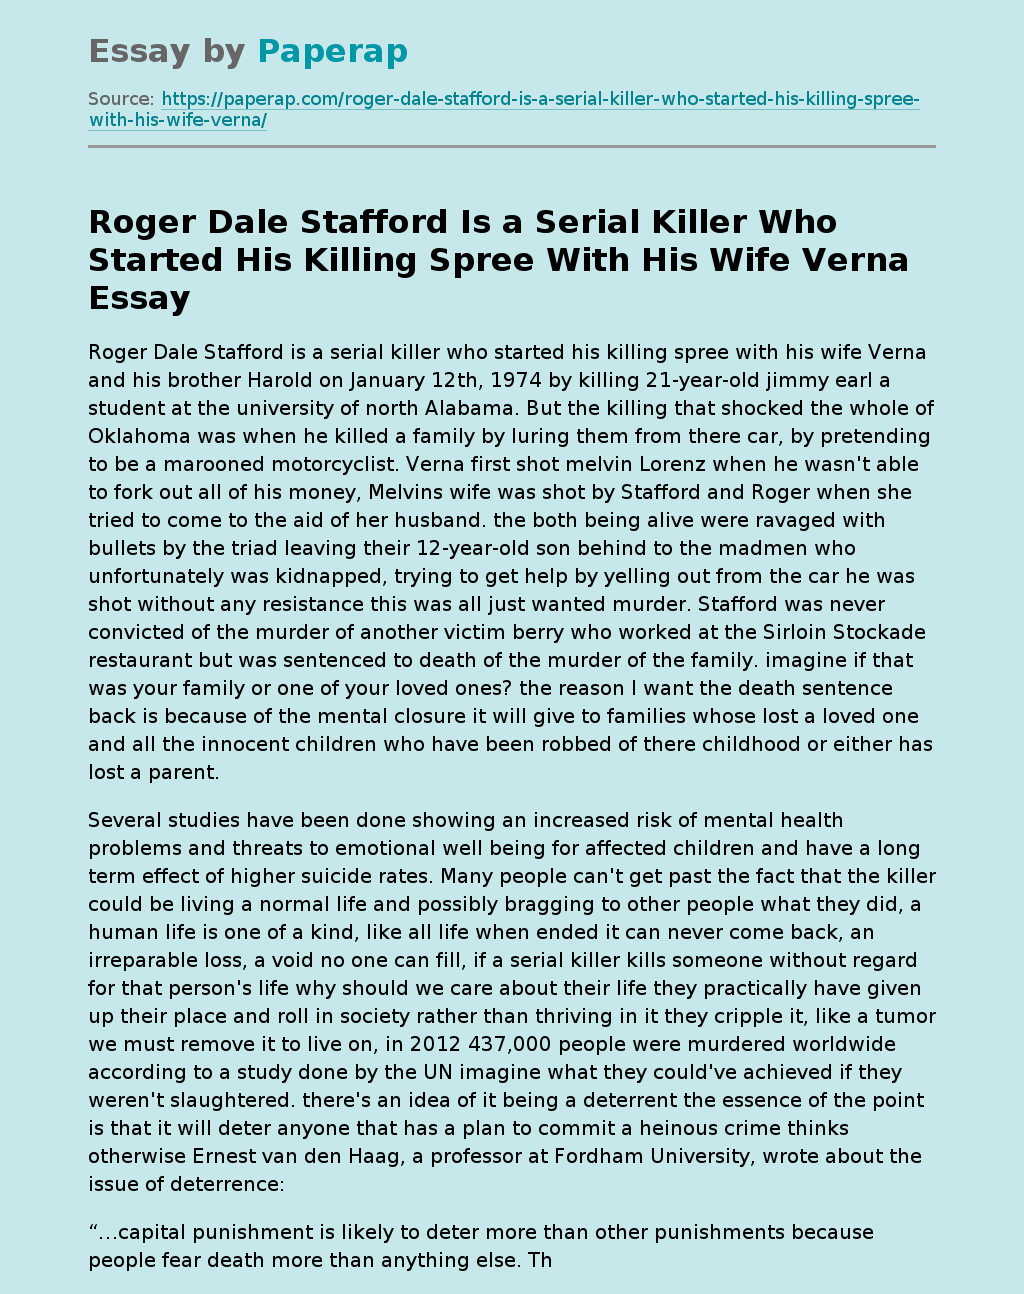 Roger Dale Stafford Is a Serial Killer Who Started His Killing Spree With His Wife Verna